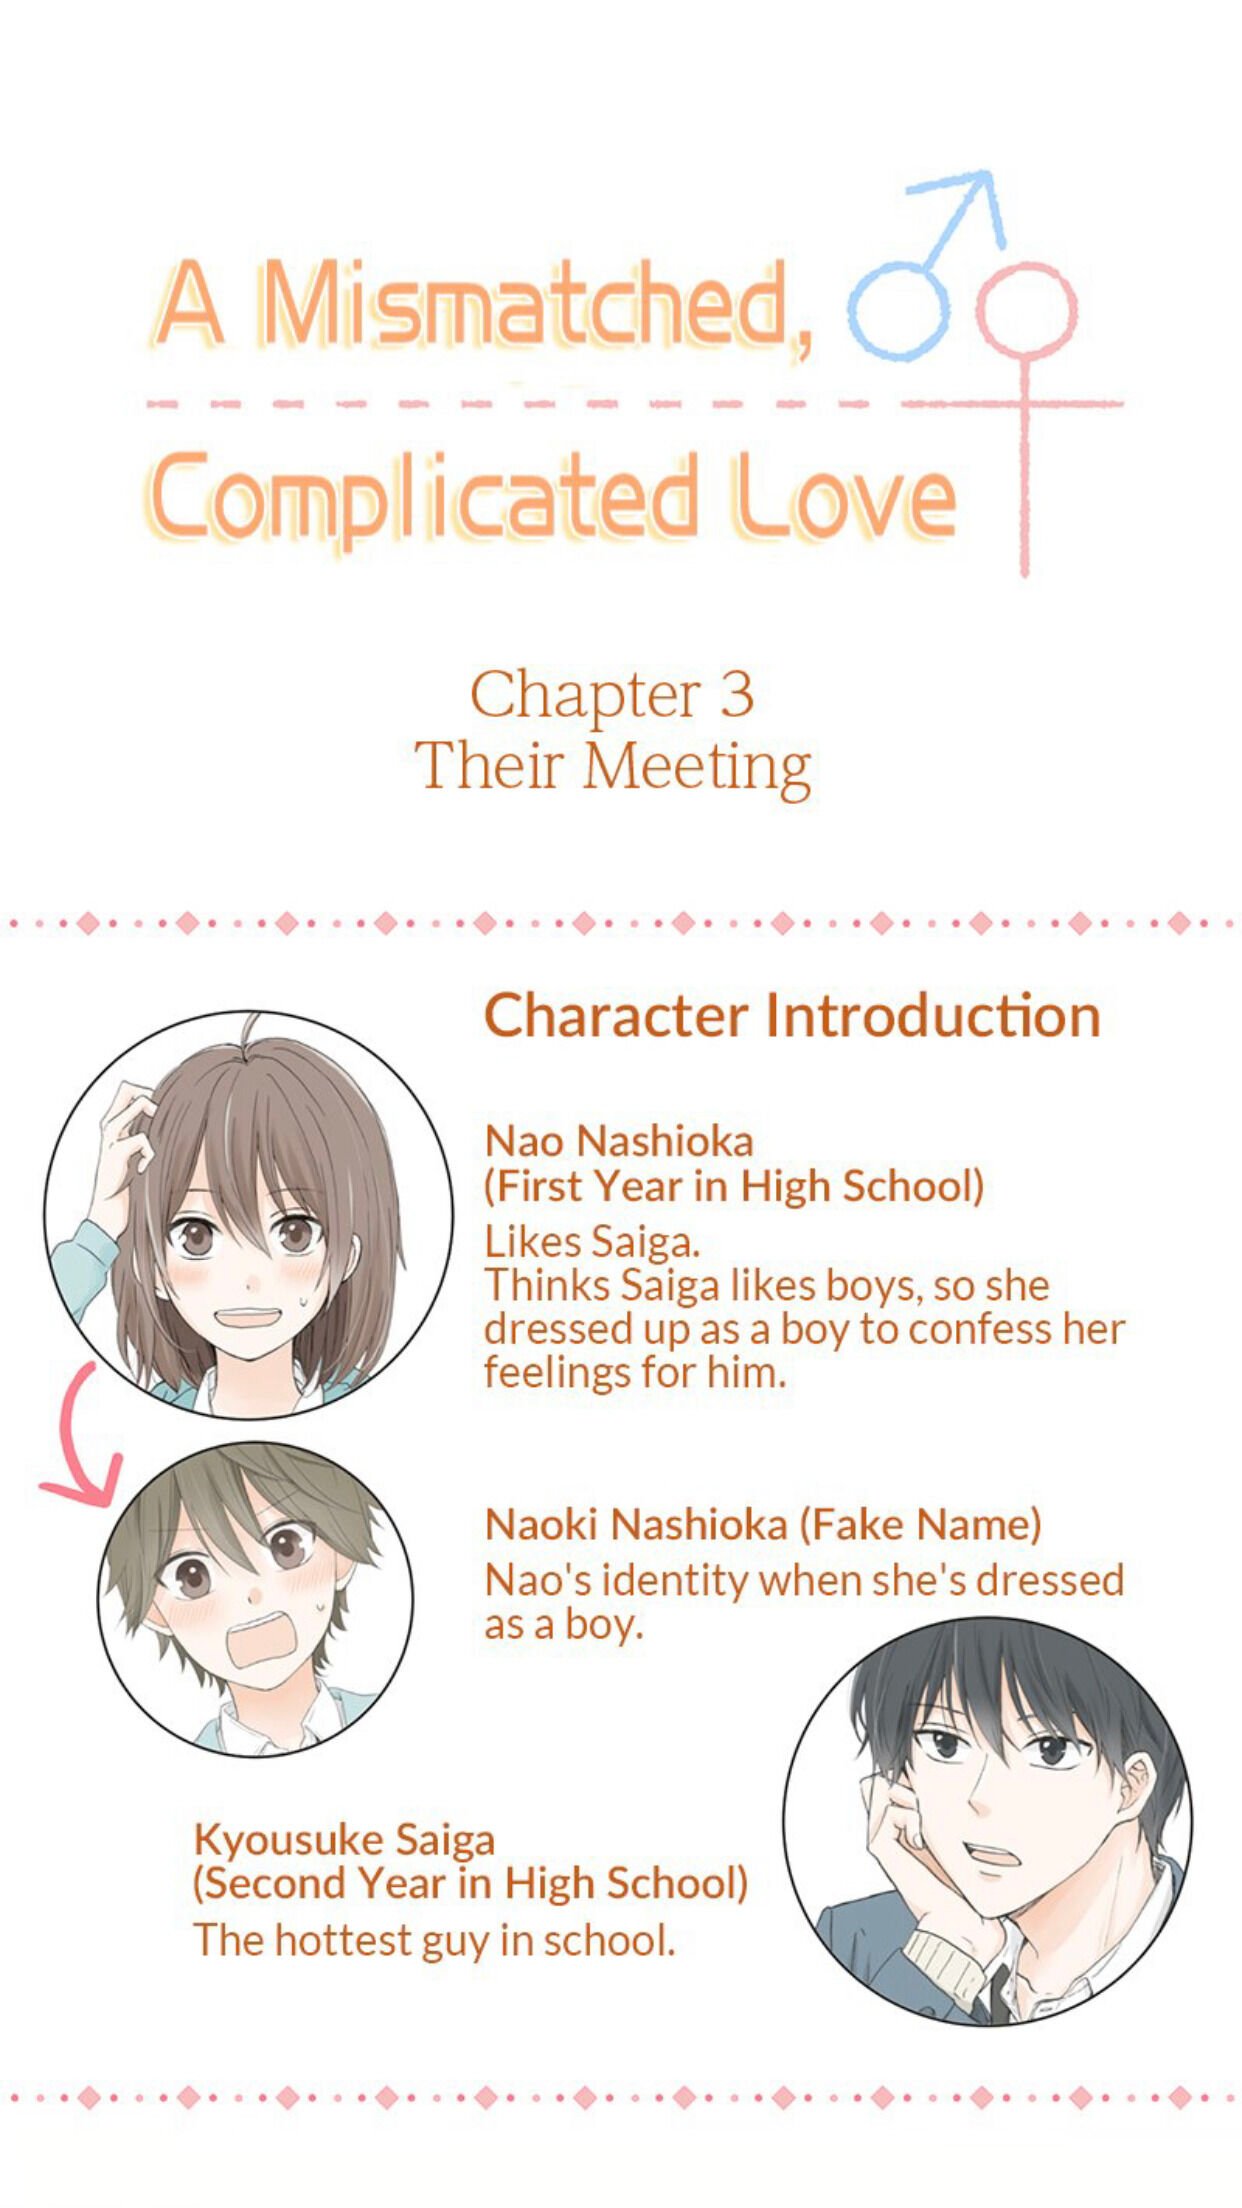 A Mismatched Complicated Love chapter 3